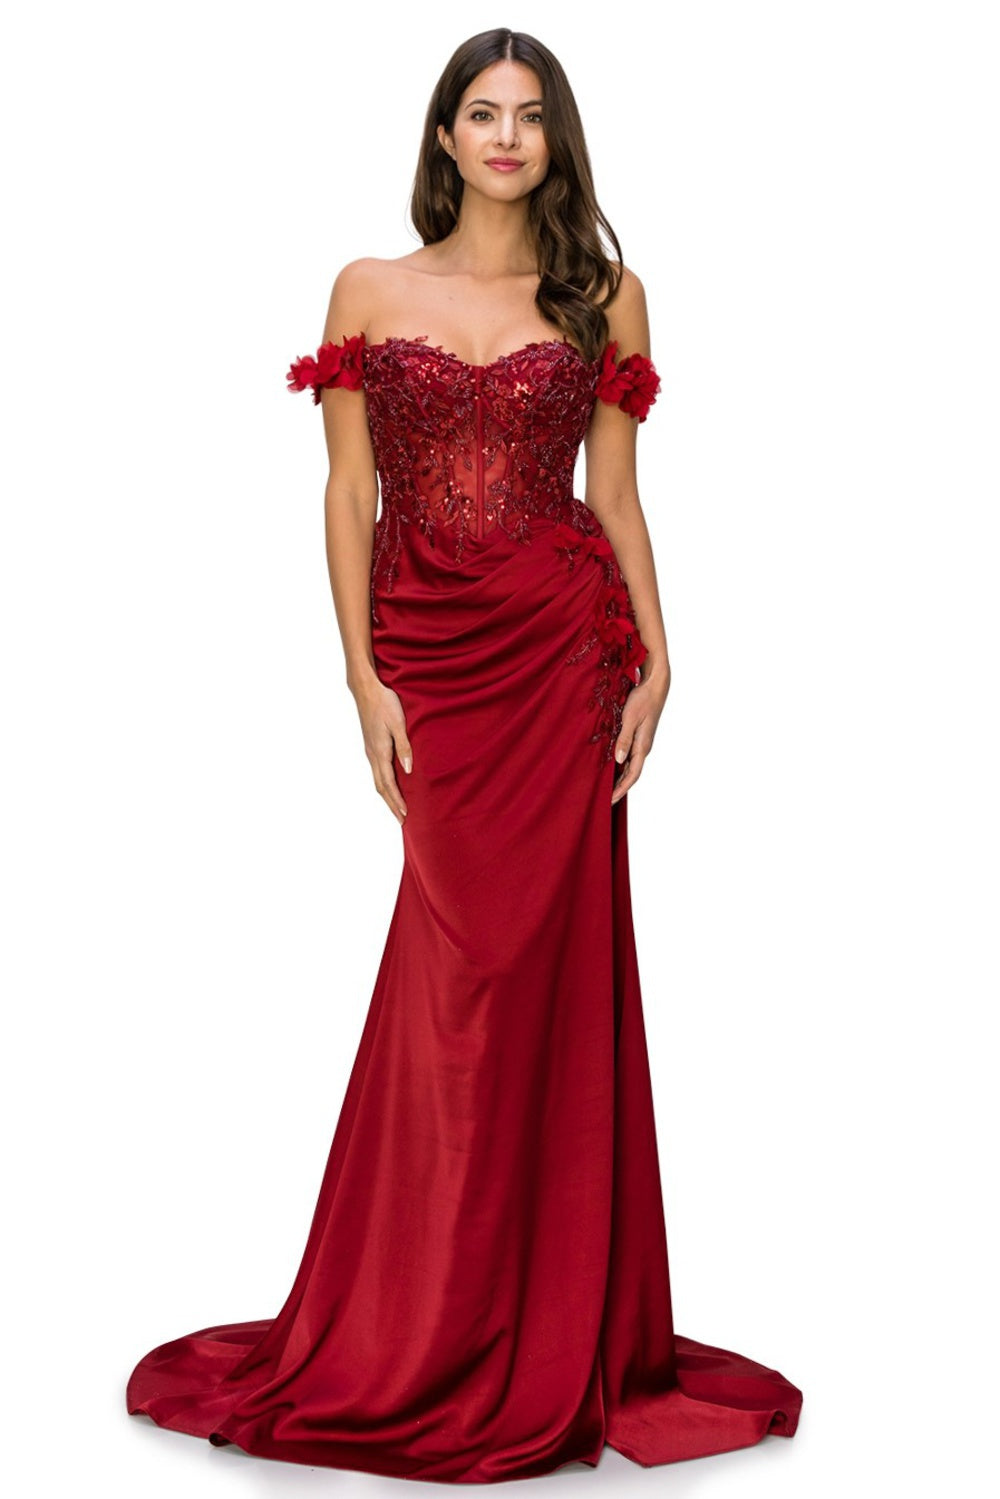 Wine_2 Floral Off The Shoulder Gown AS8050J - Special Occasion-Curves